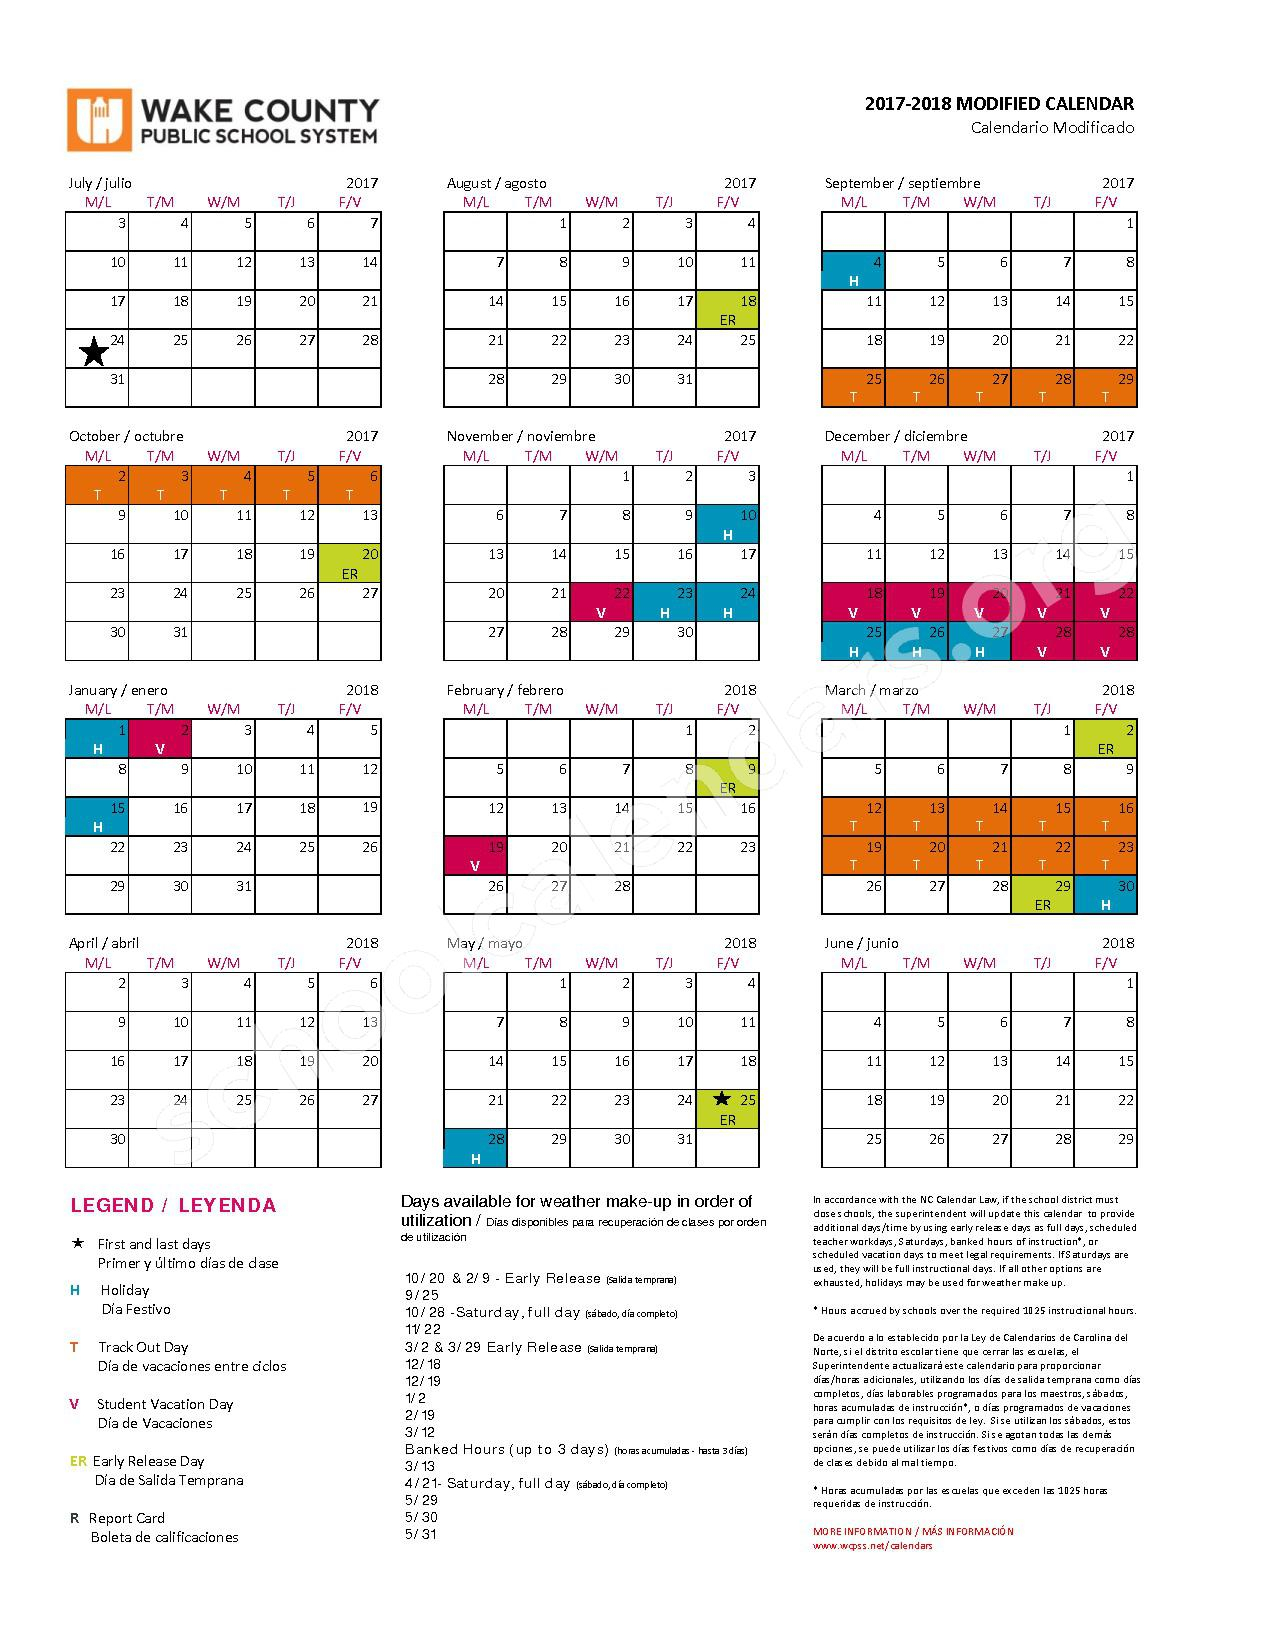 Wake County District Court Calendar Customize And Print